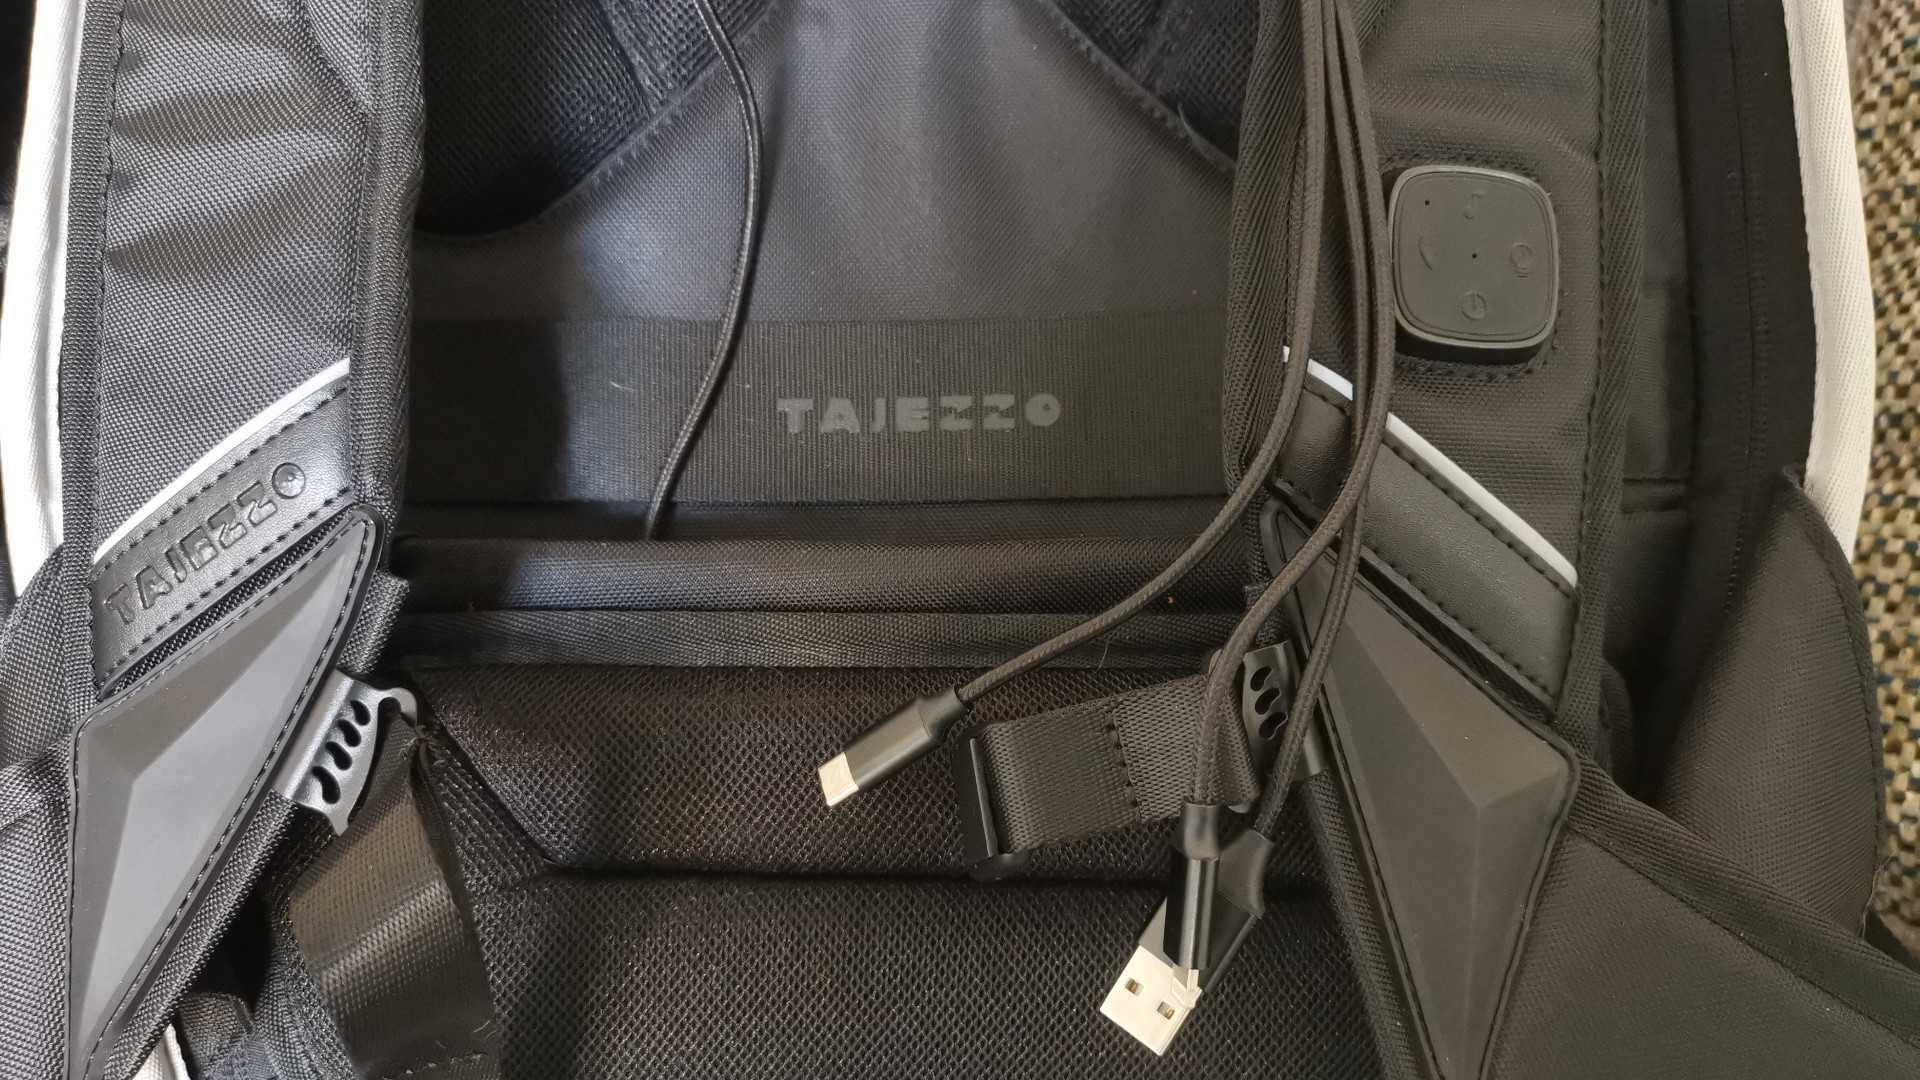 Charging cables on the Tajezzo PZ5 backpack